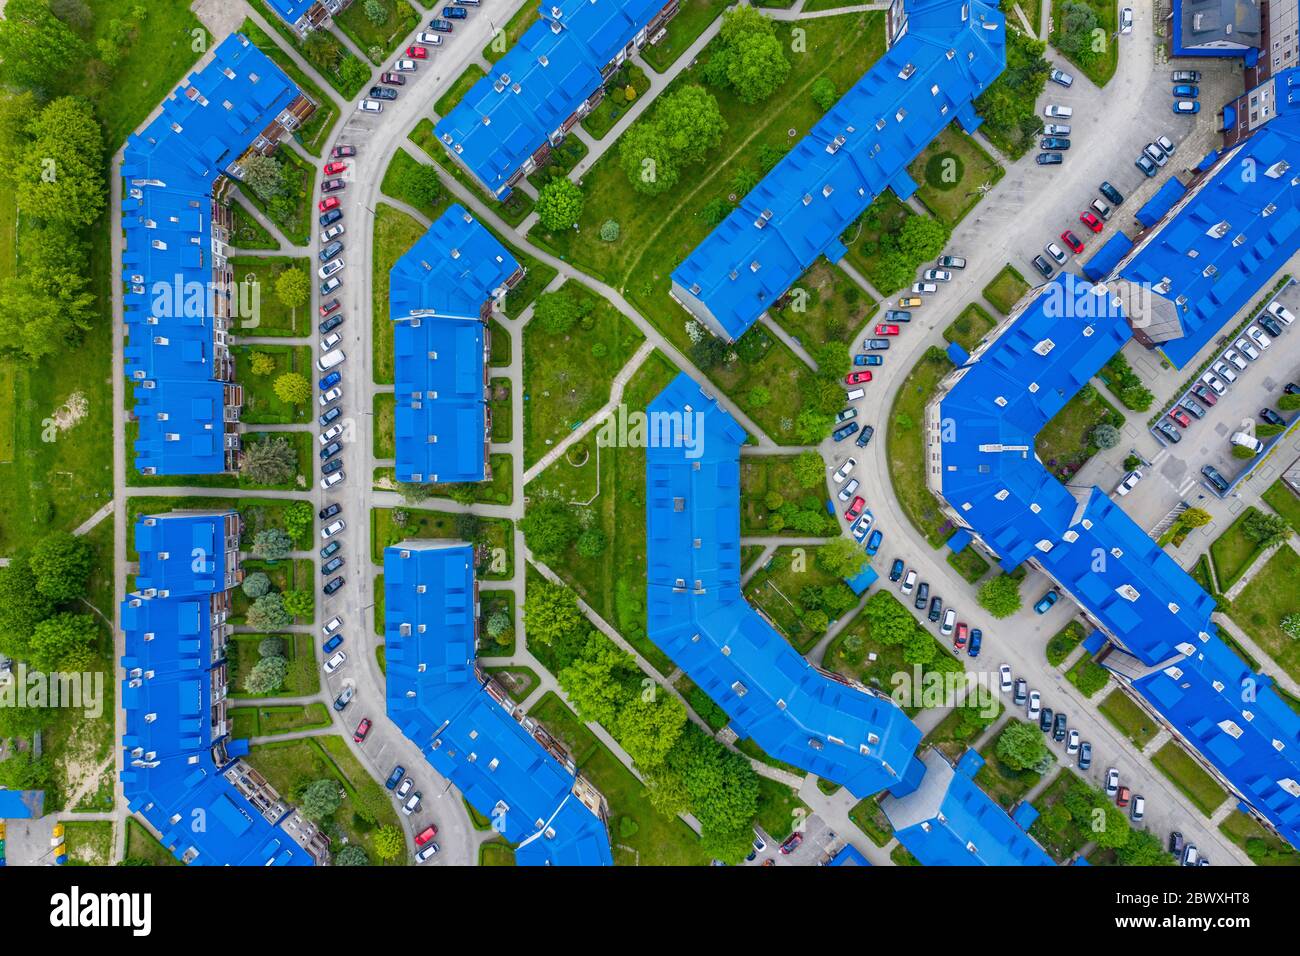 Aerial view of the housing estate with blue roofs. Estate Sloviki located in Olkusz, Poland. Stock Photo